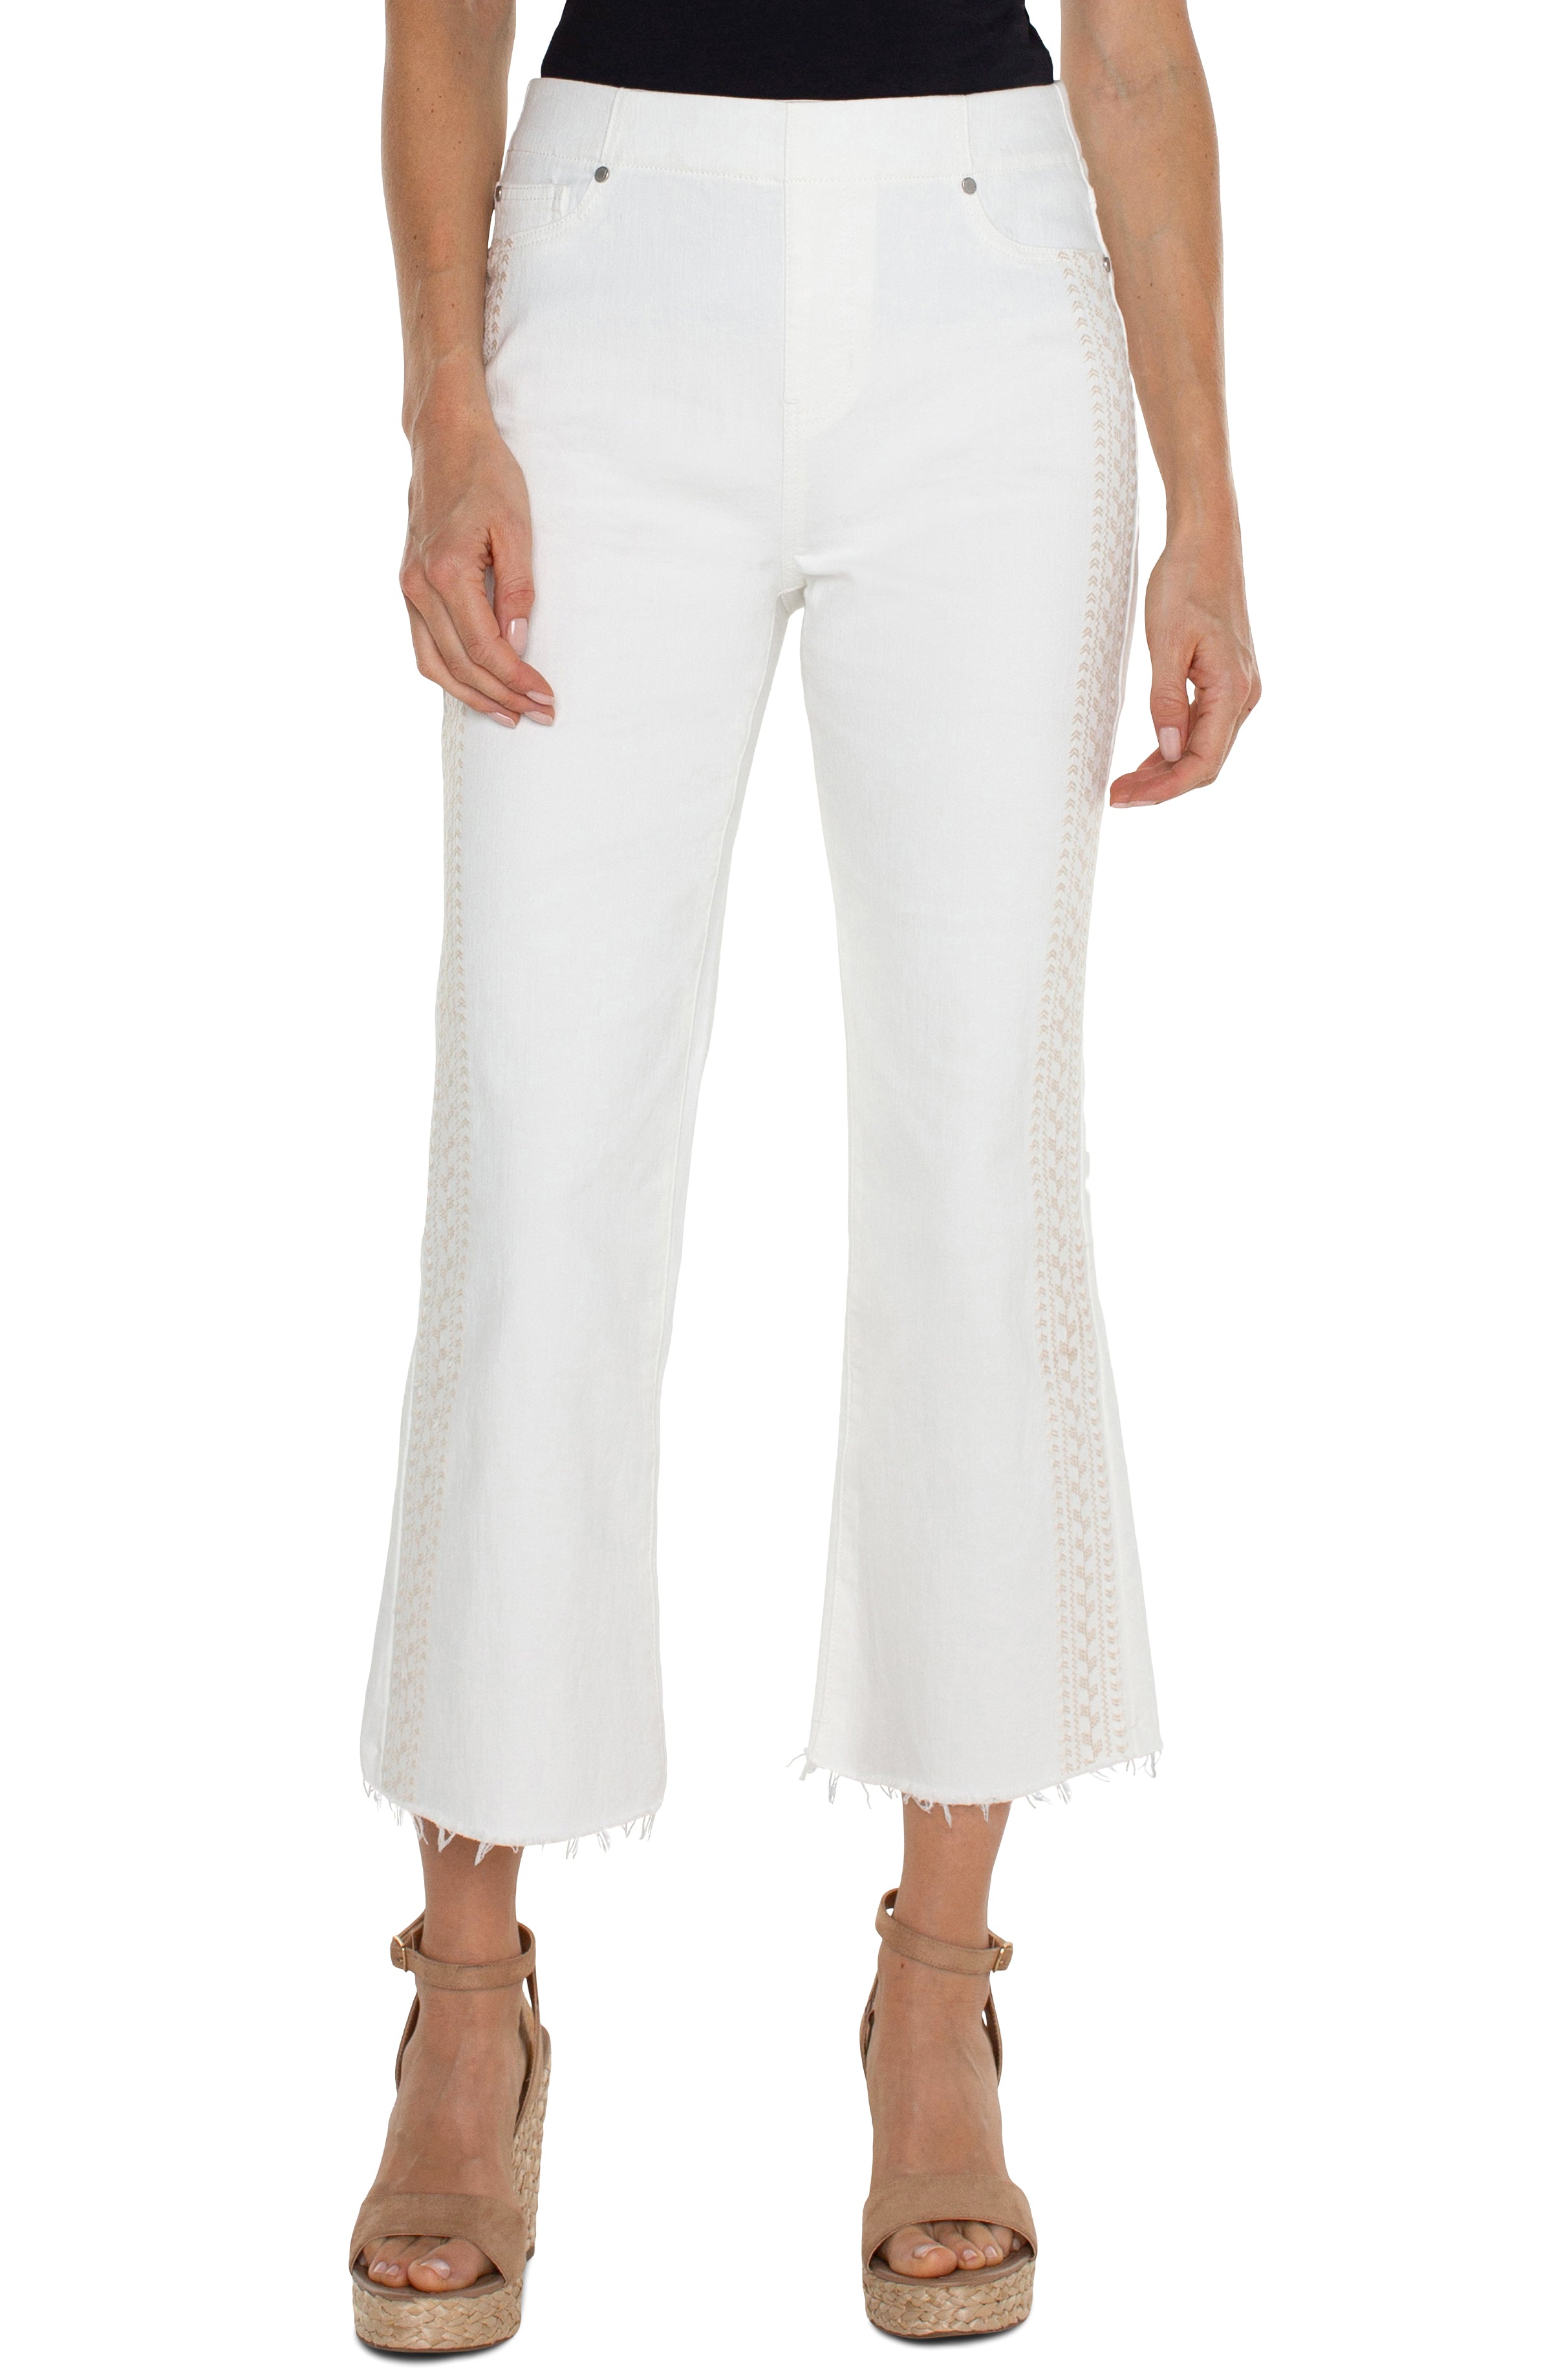 LVP Chloe Crop Flare with Fray Hem - Bright White Front View